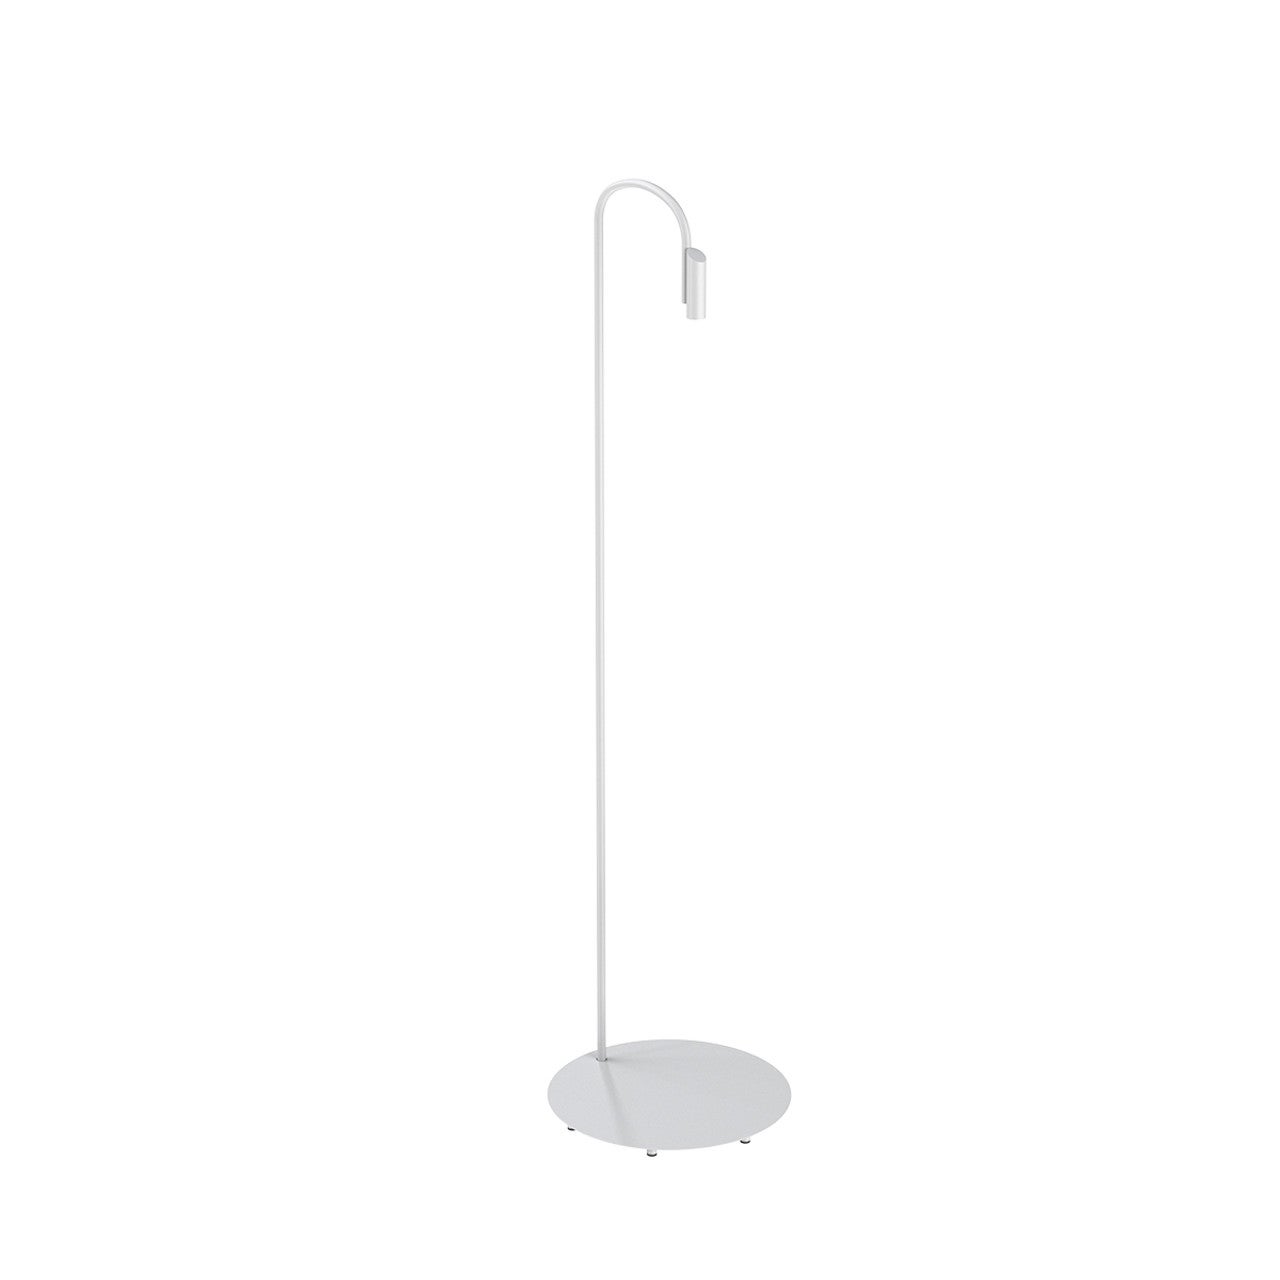 Flos Caule 3000K Model 4 Outdoor Floor Lamp in White with Regular Shade For Sale